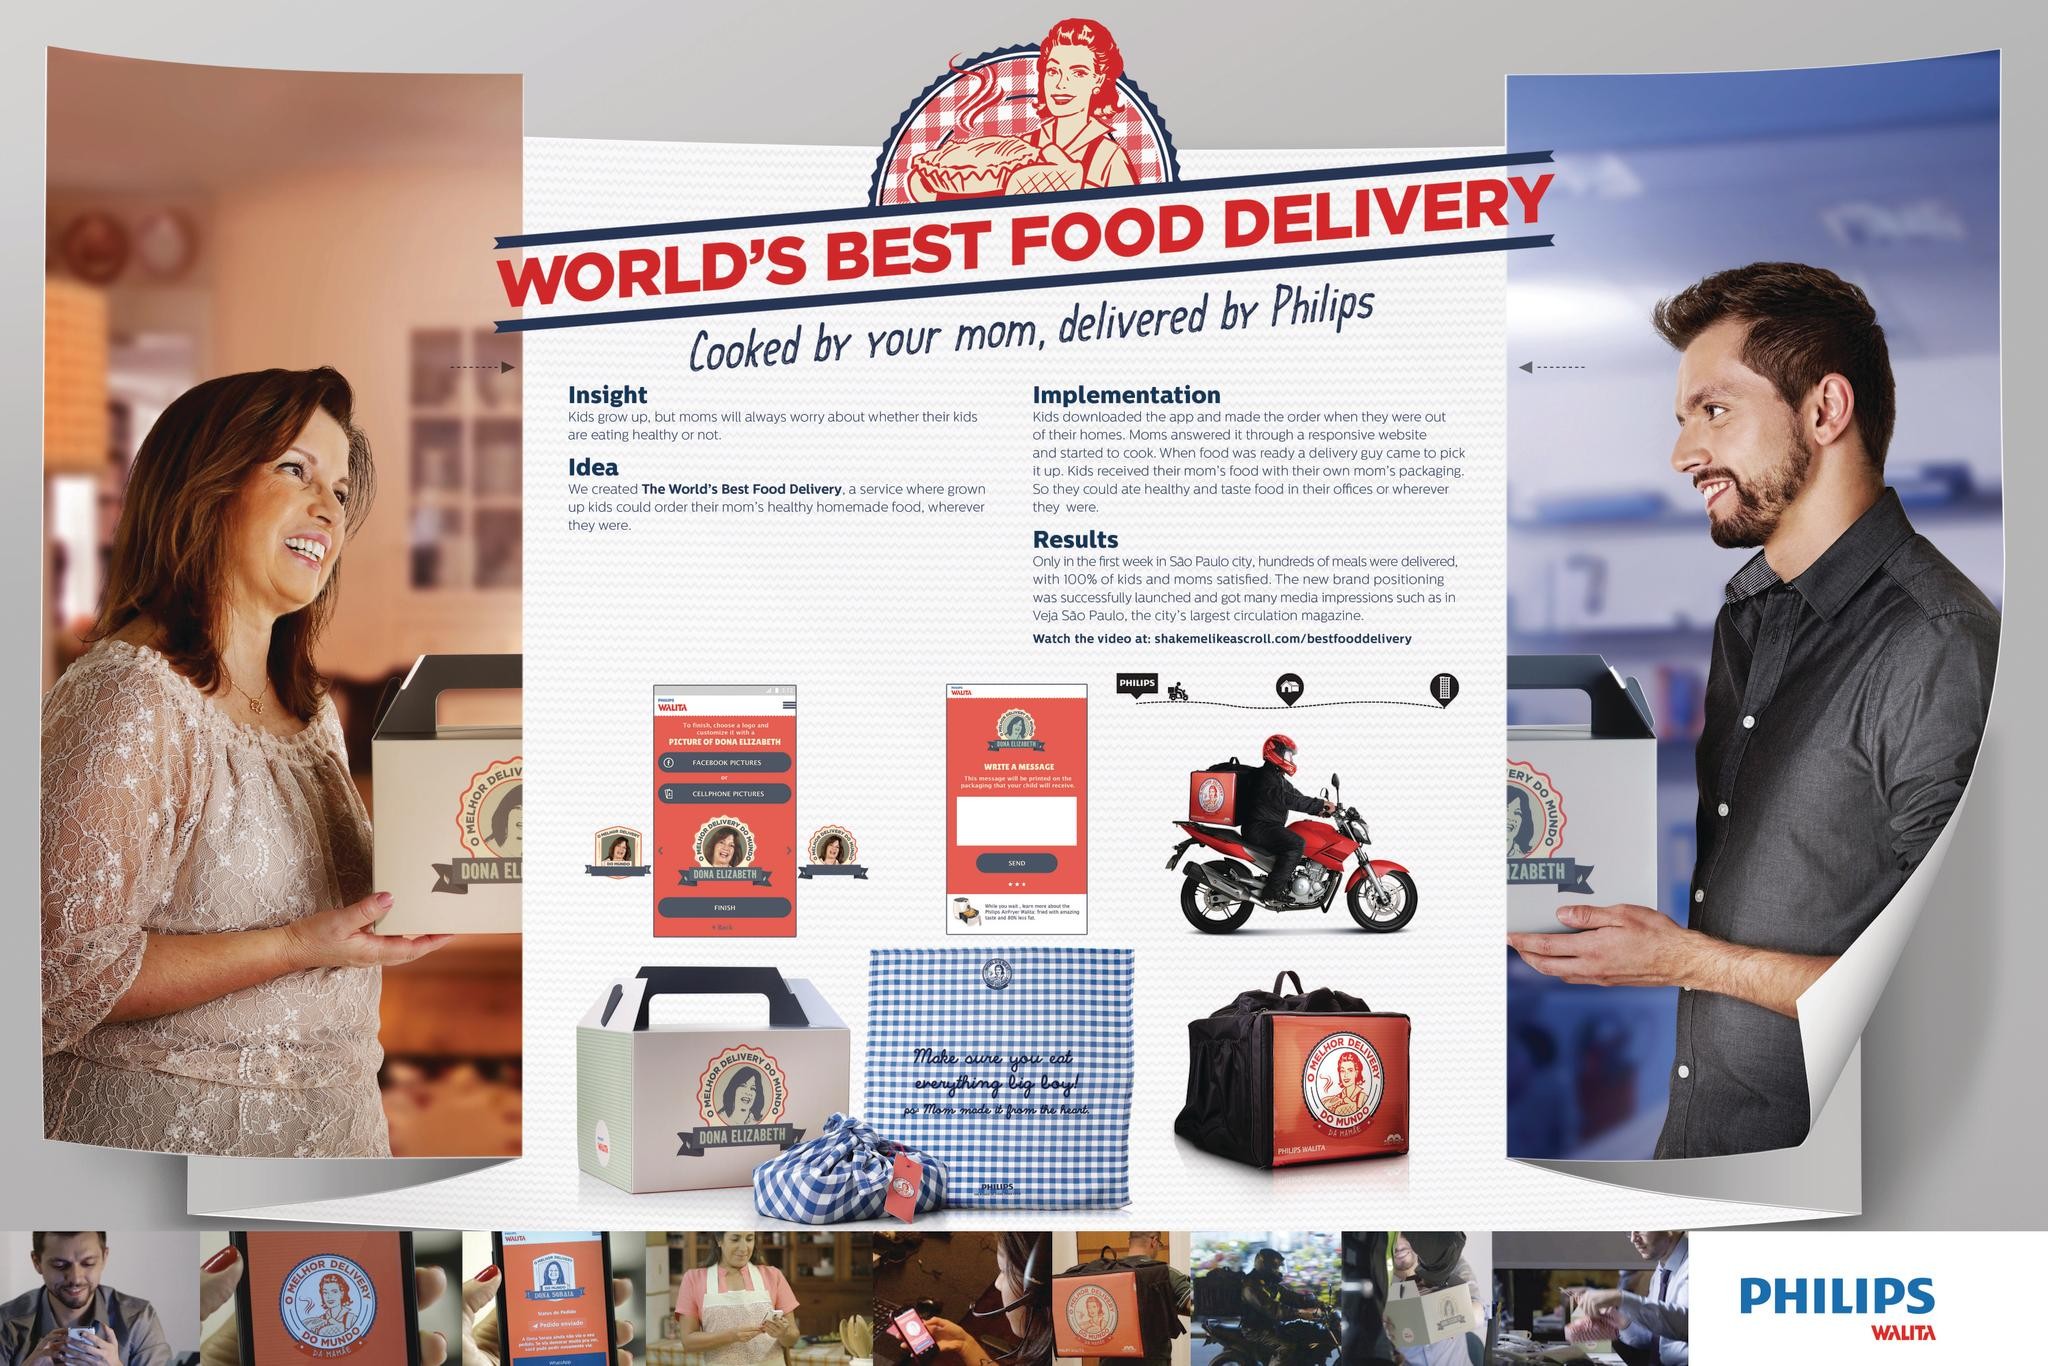 WORLD'S BEST FOOD DELIVERY